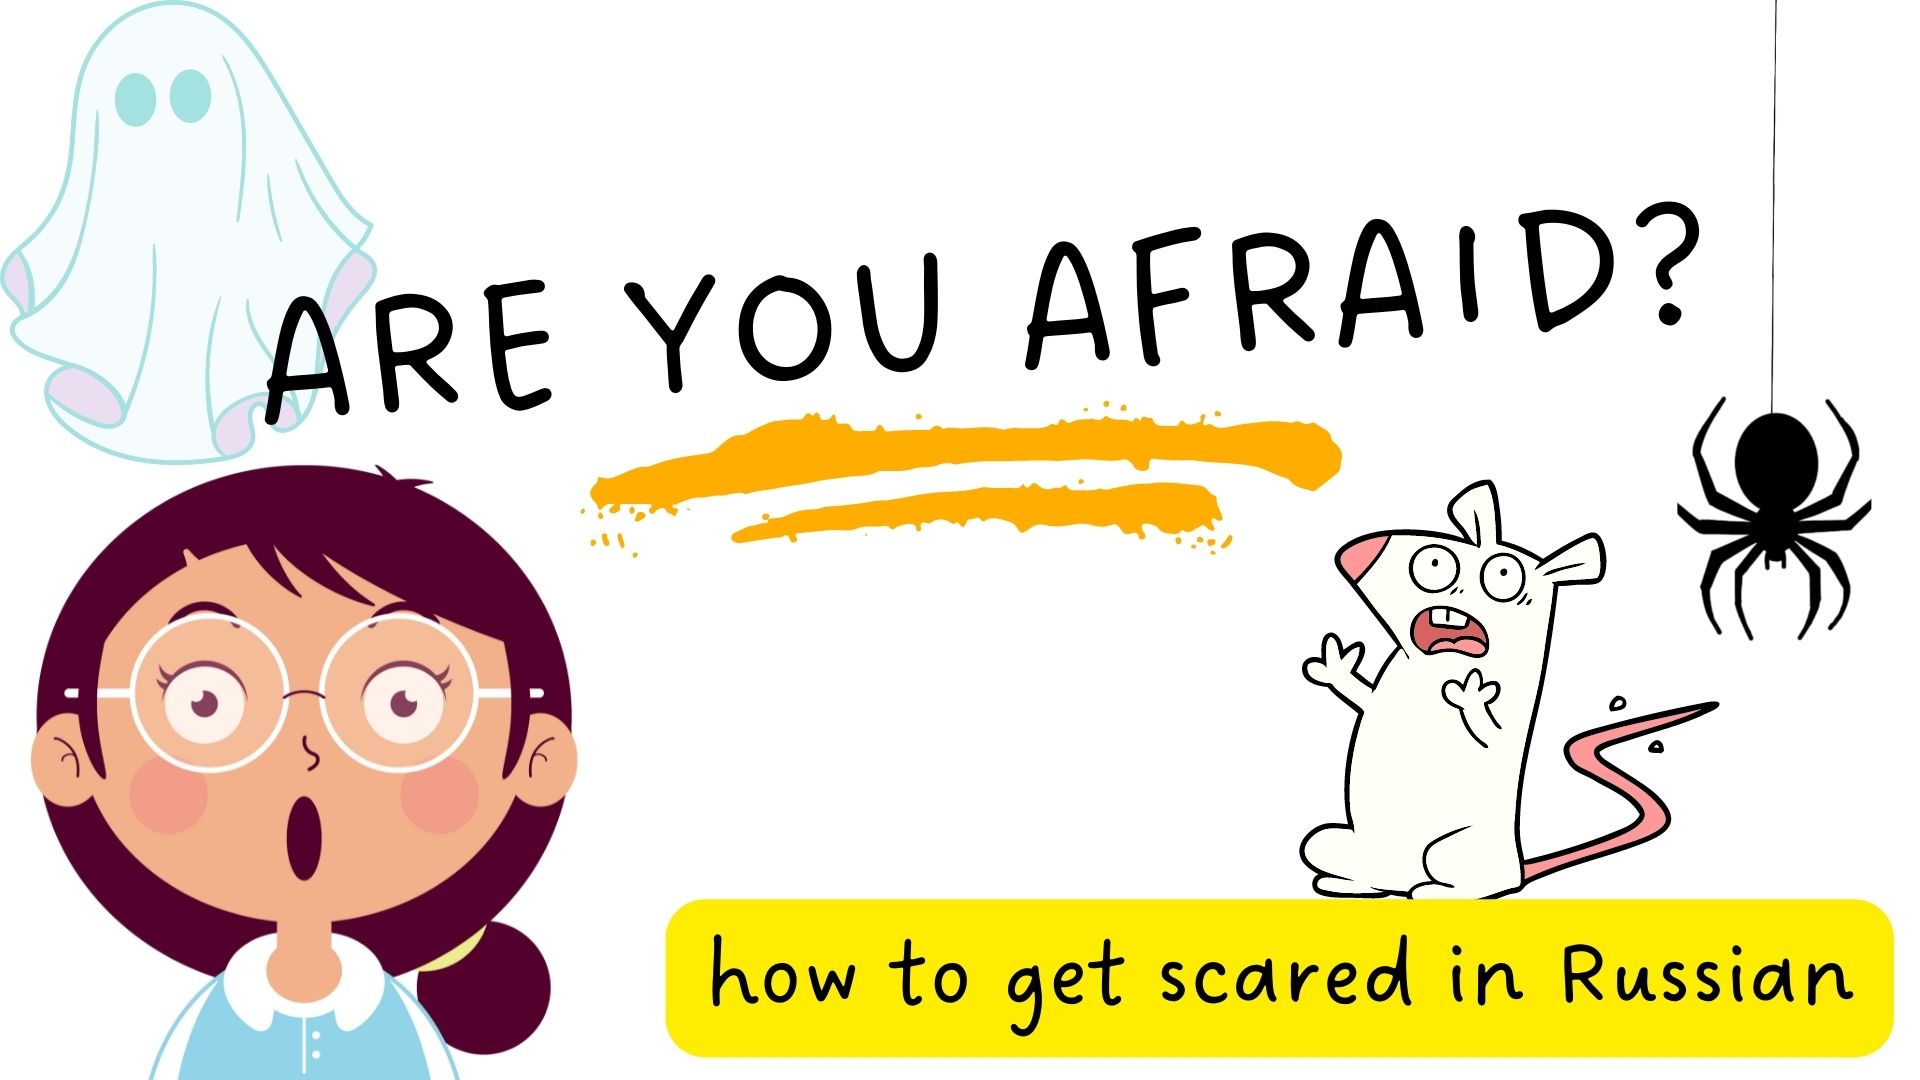 Scared scaring разница. Scared frightened afraid разница. Разница между afraid и scared. Scare afraid of разница.